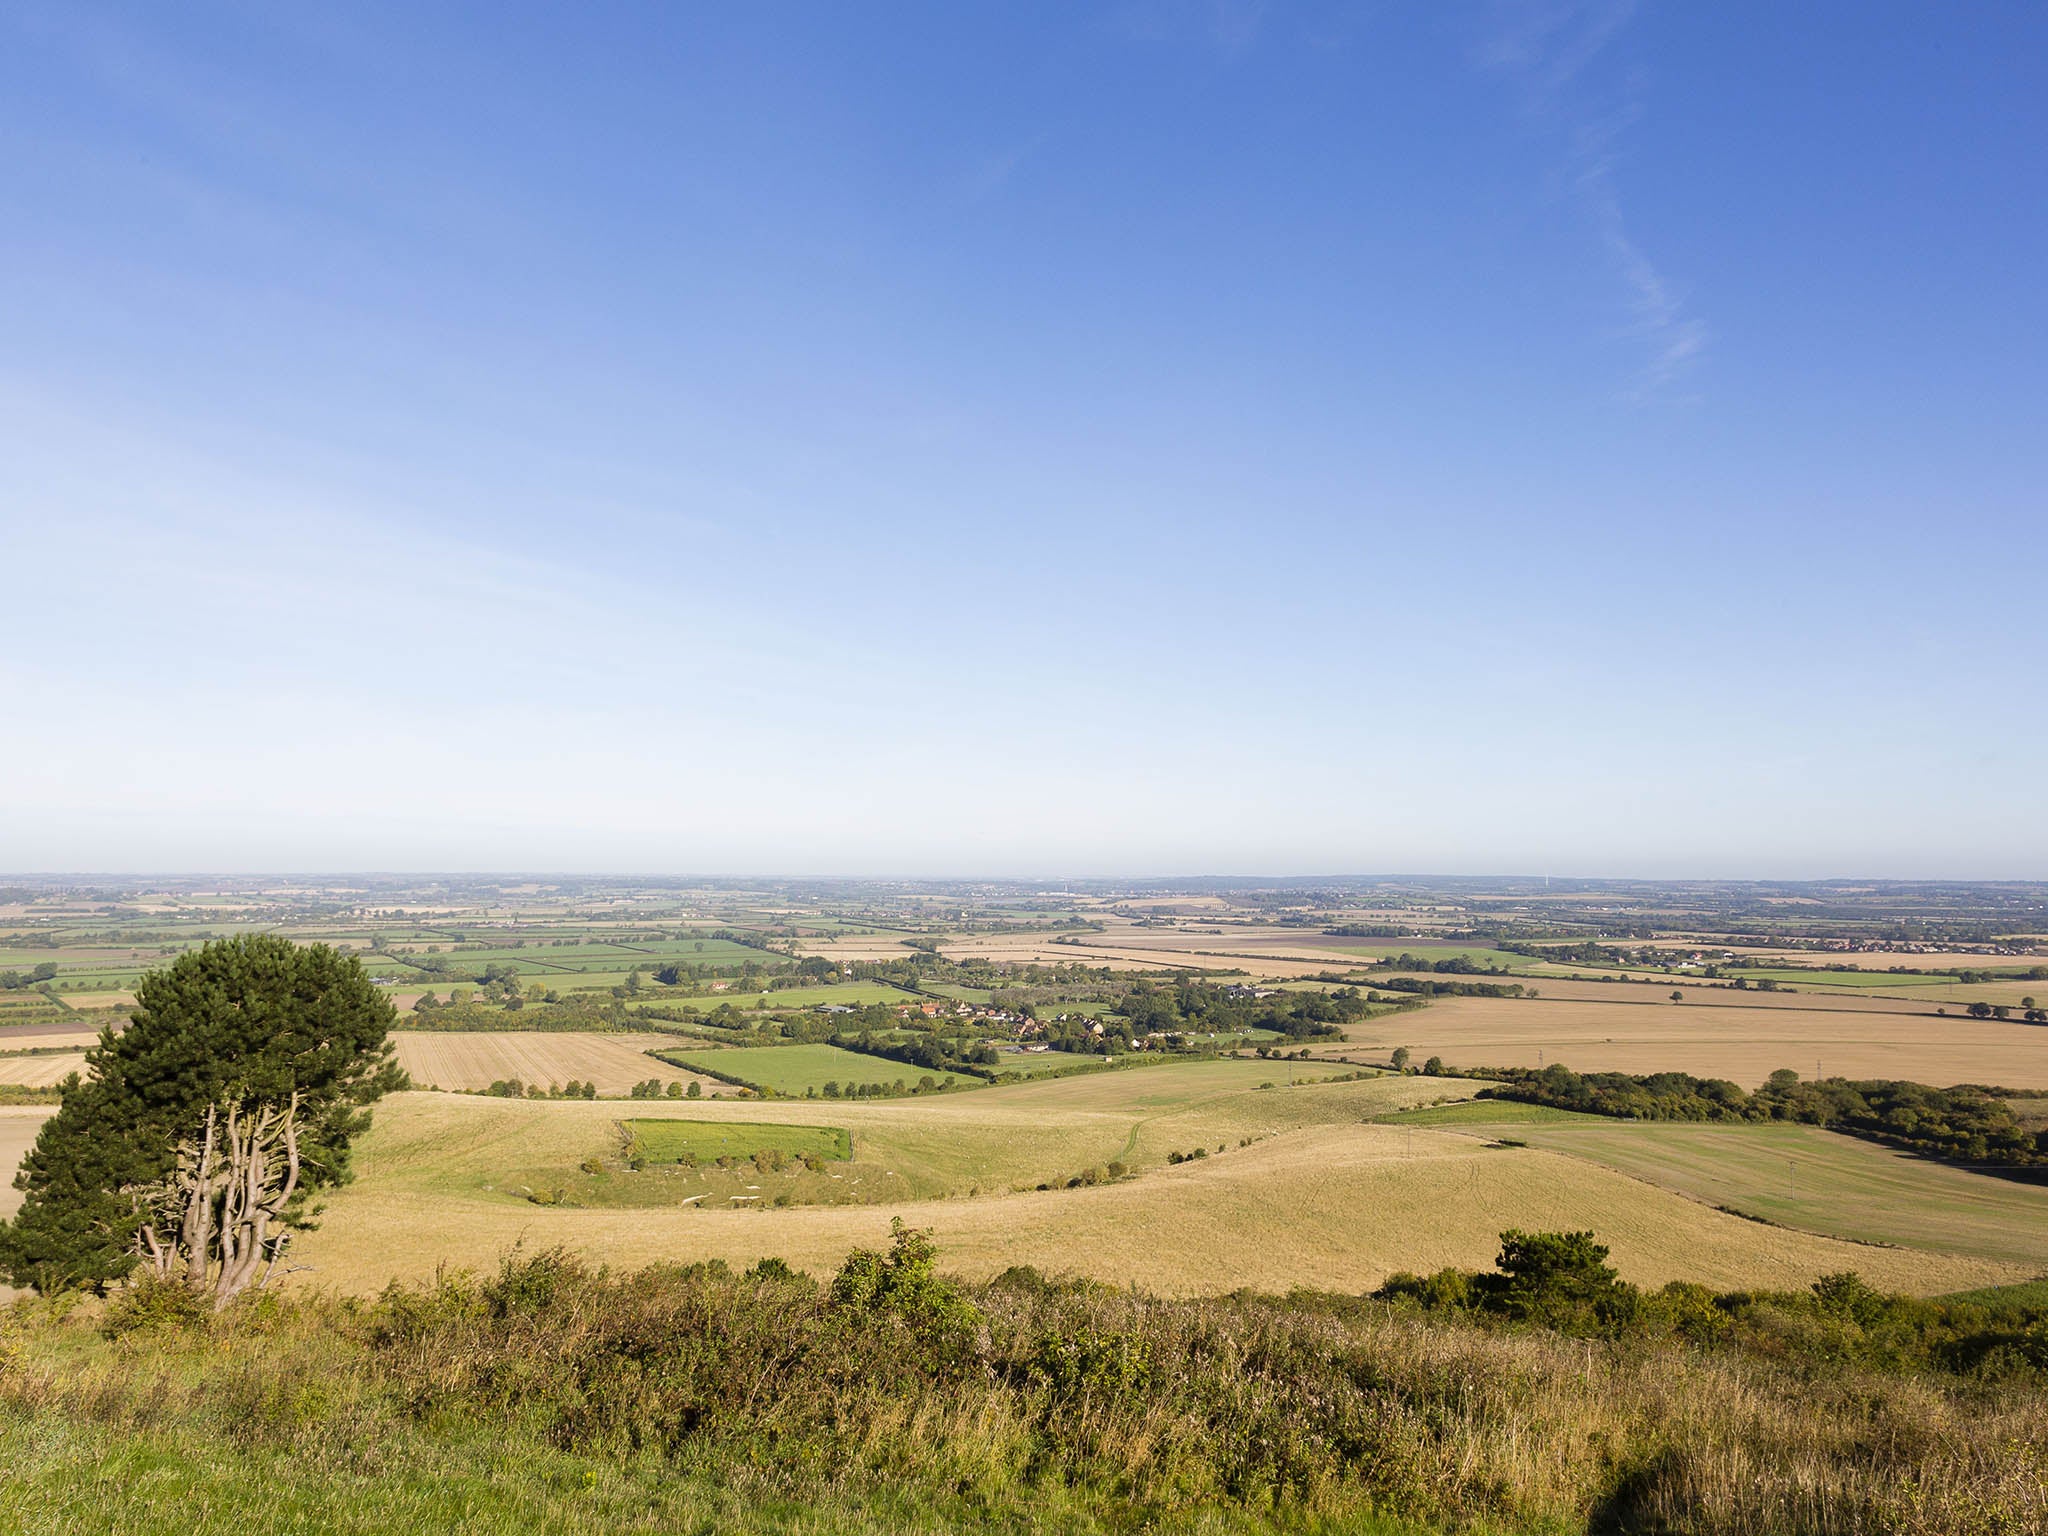 The view from Ivinghoe Beacon overlooking the Chiltern Hill